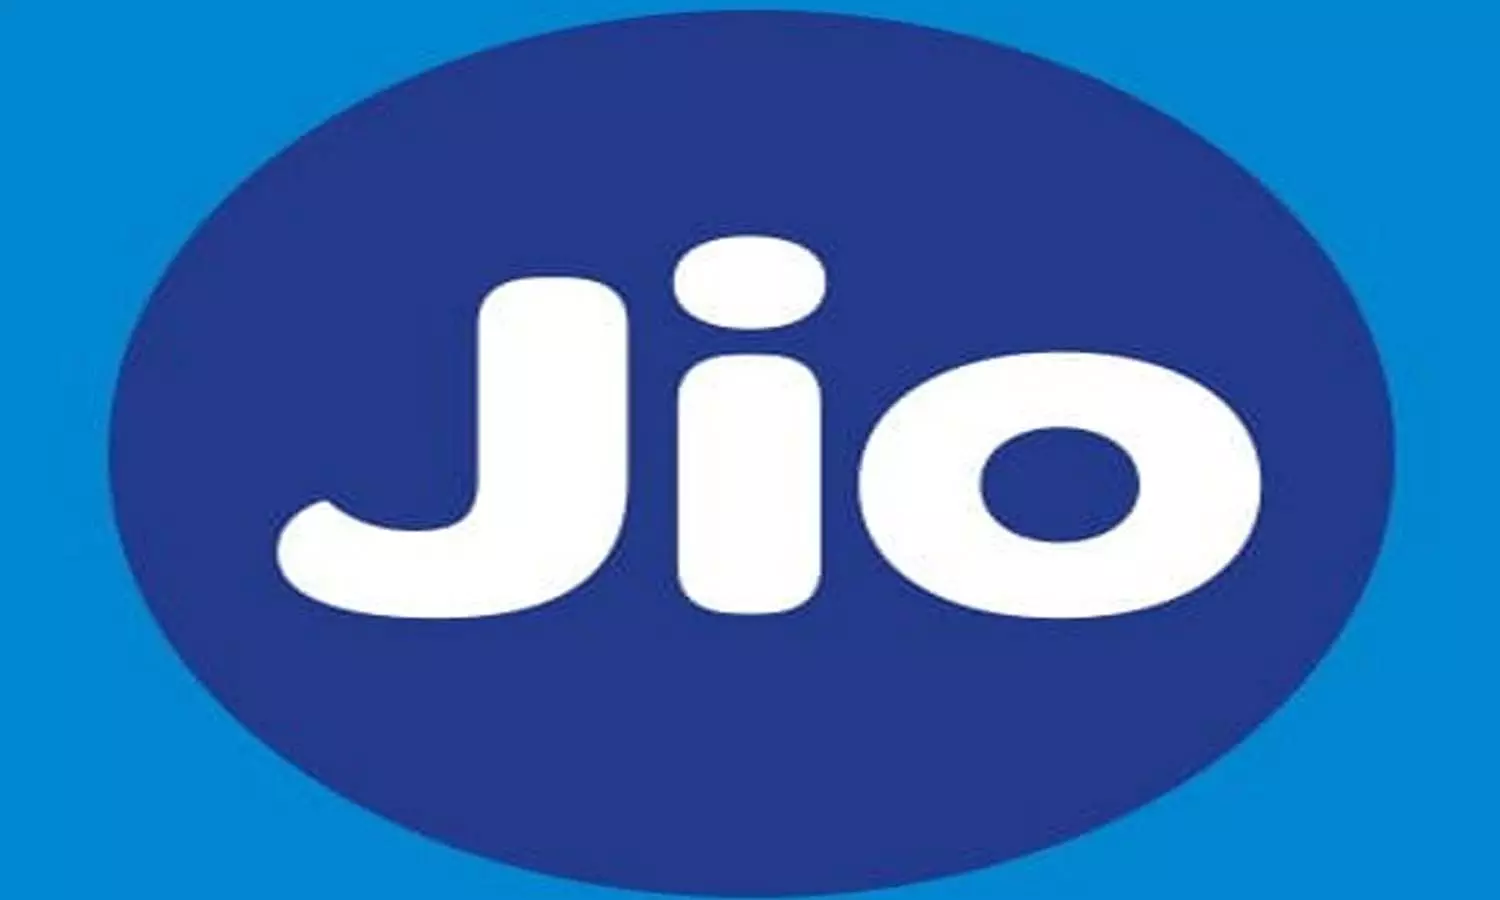 TRAI report - Jio continuously number one in Eastern UP, first choice of people in the state